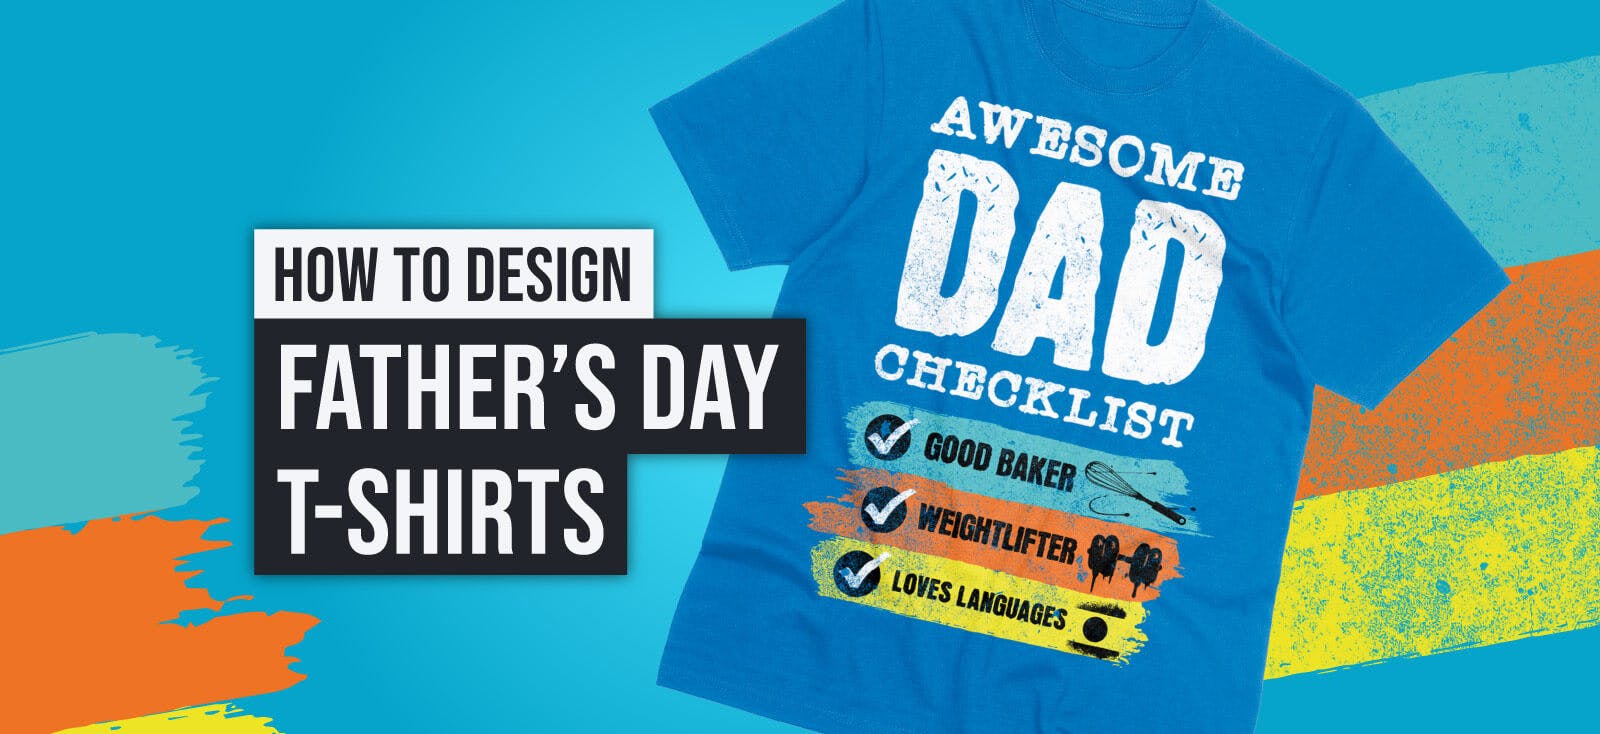 How Make Personalized Father's Day Shirts For Etsy | kittl